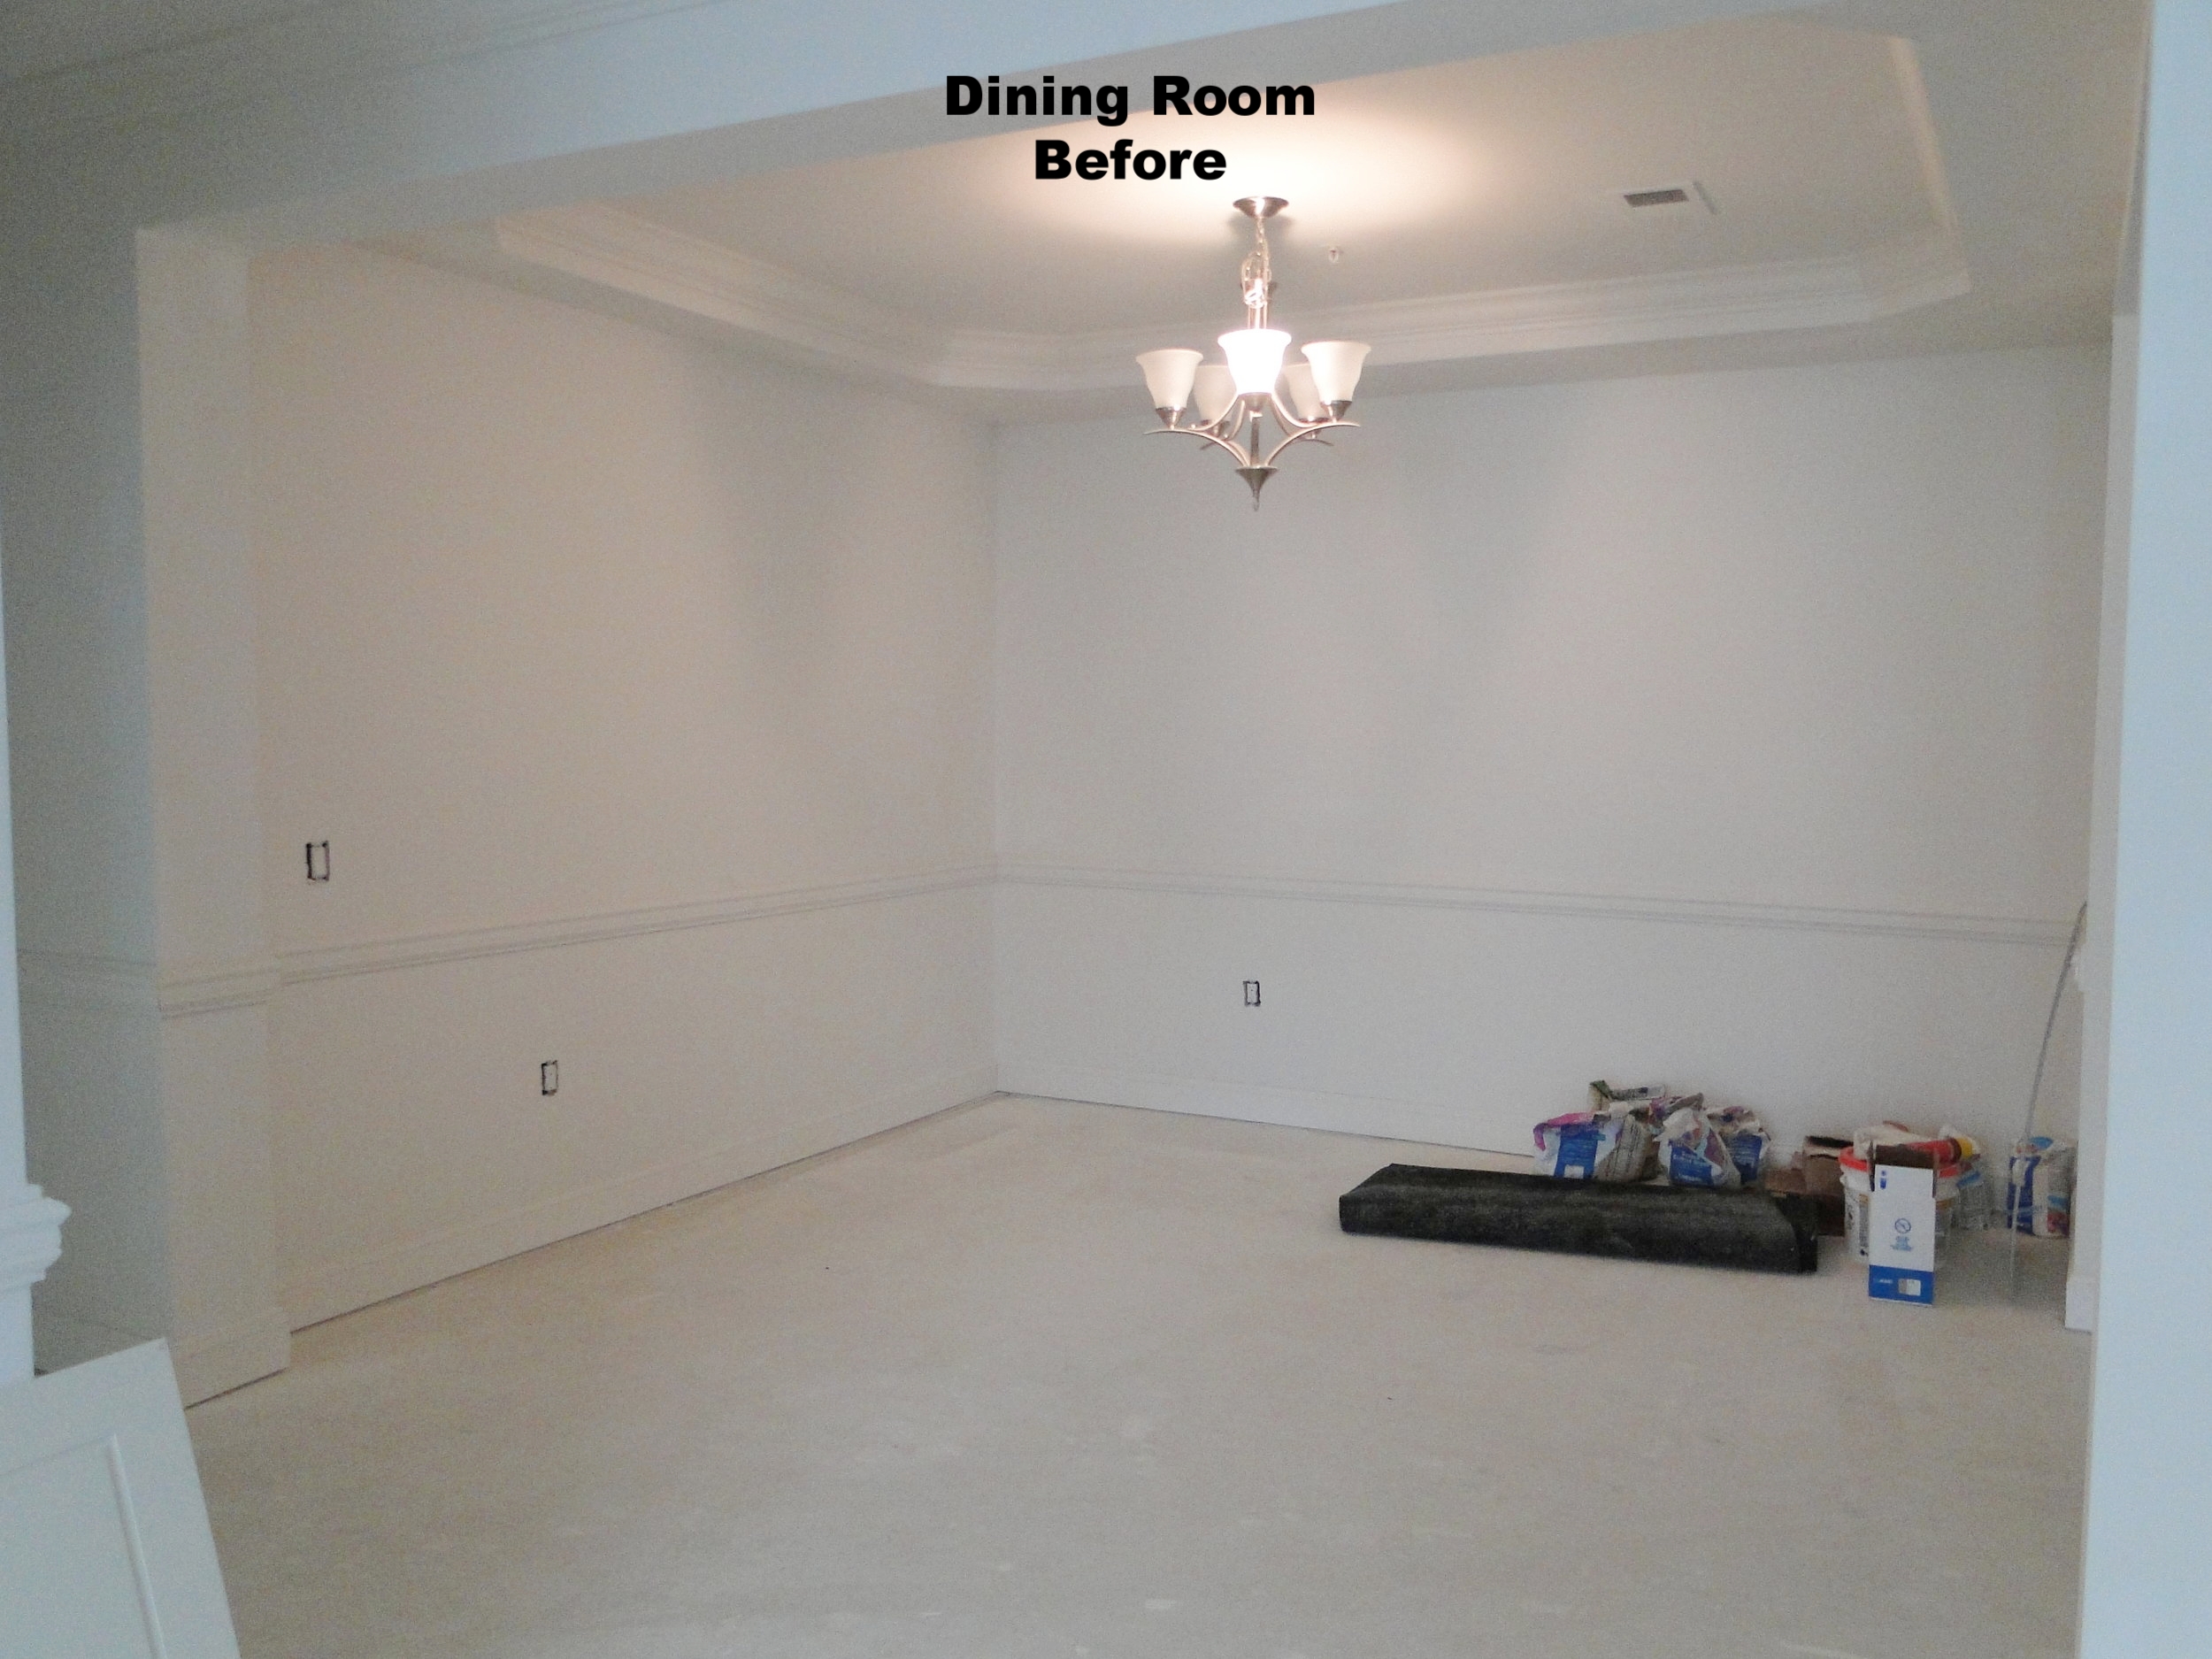 DINING ROOM BEFORE 